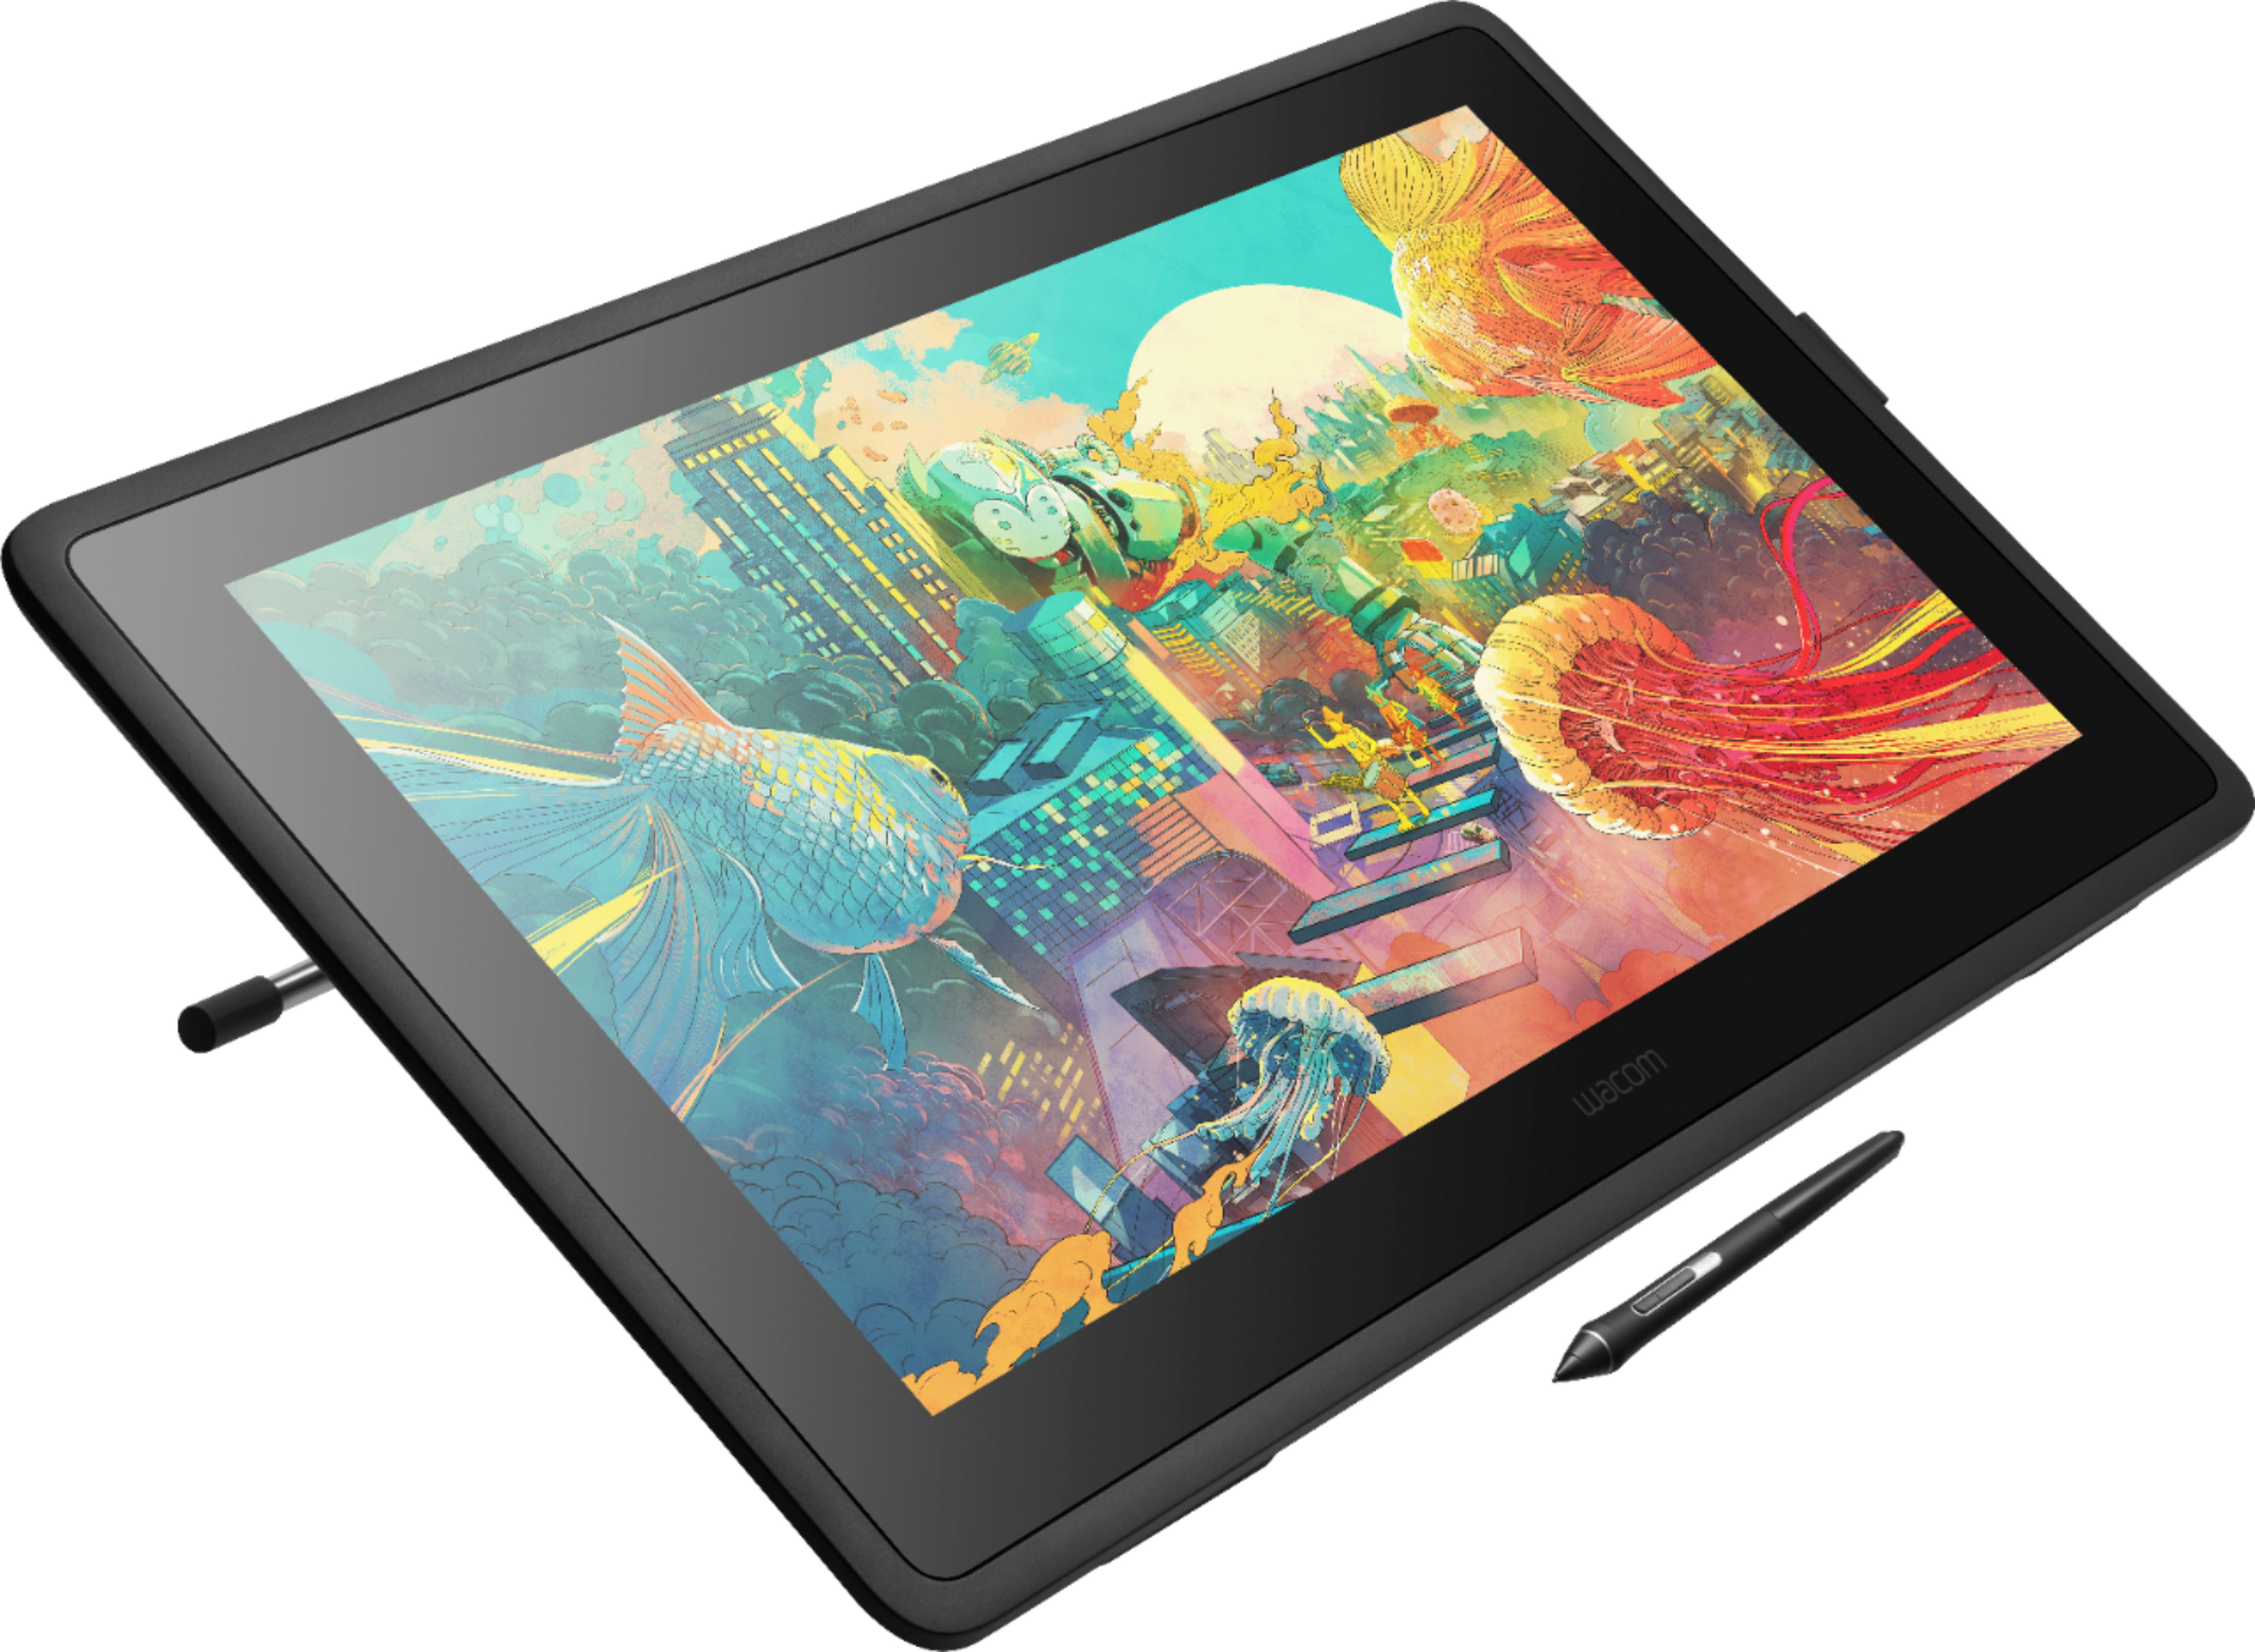 Angle View: Wacom - Intuos Pro Pen Drawing Tablet (Large) - Black